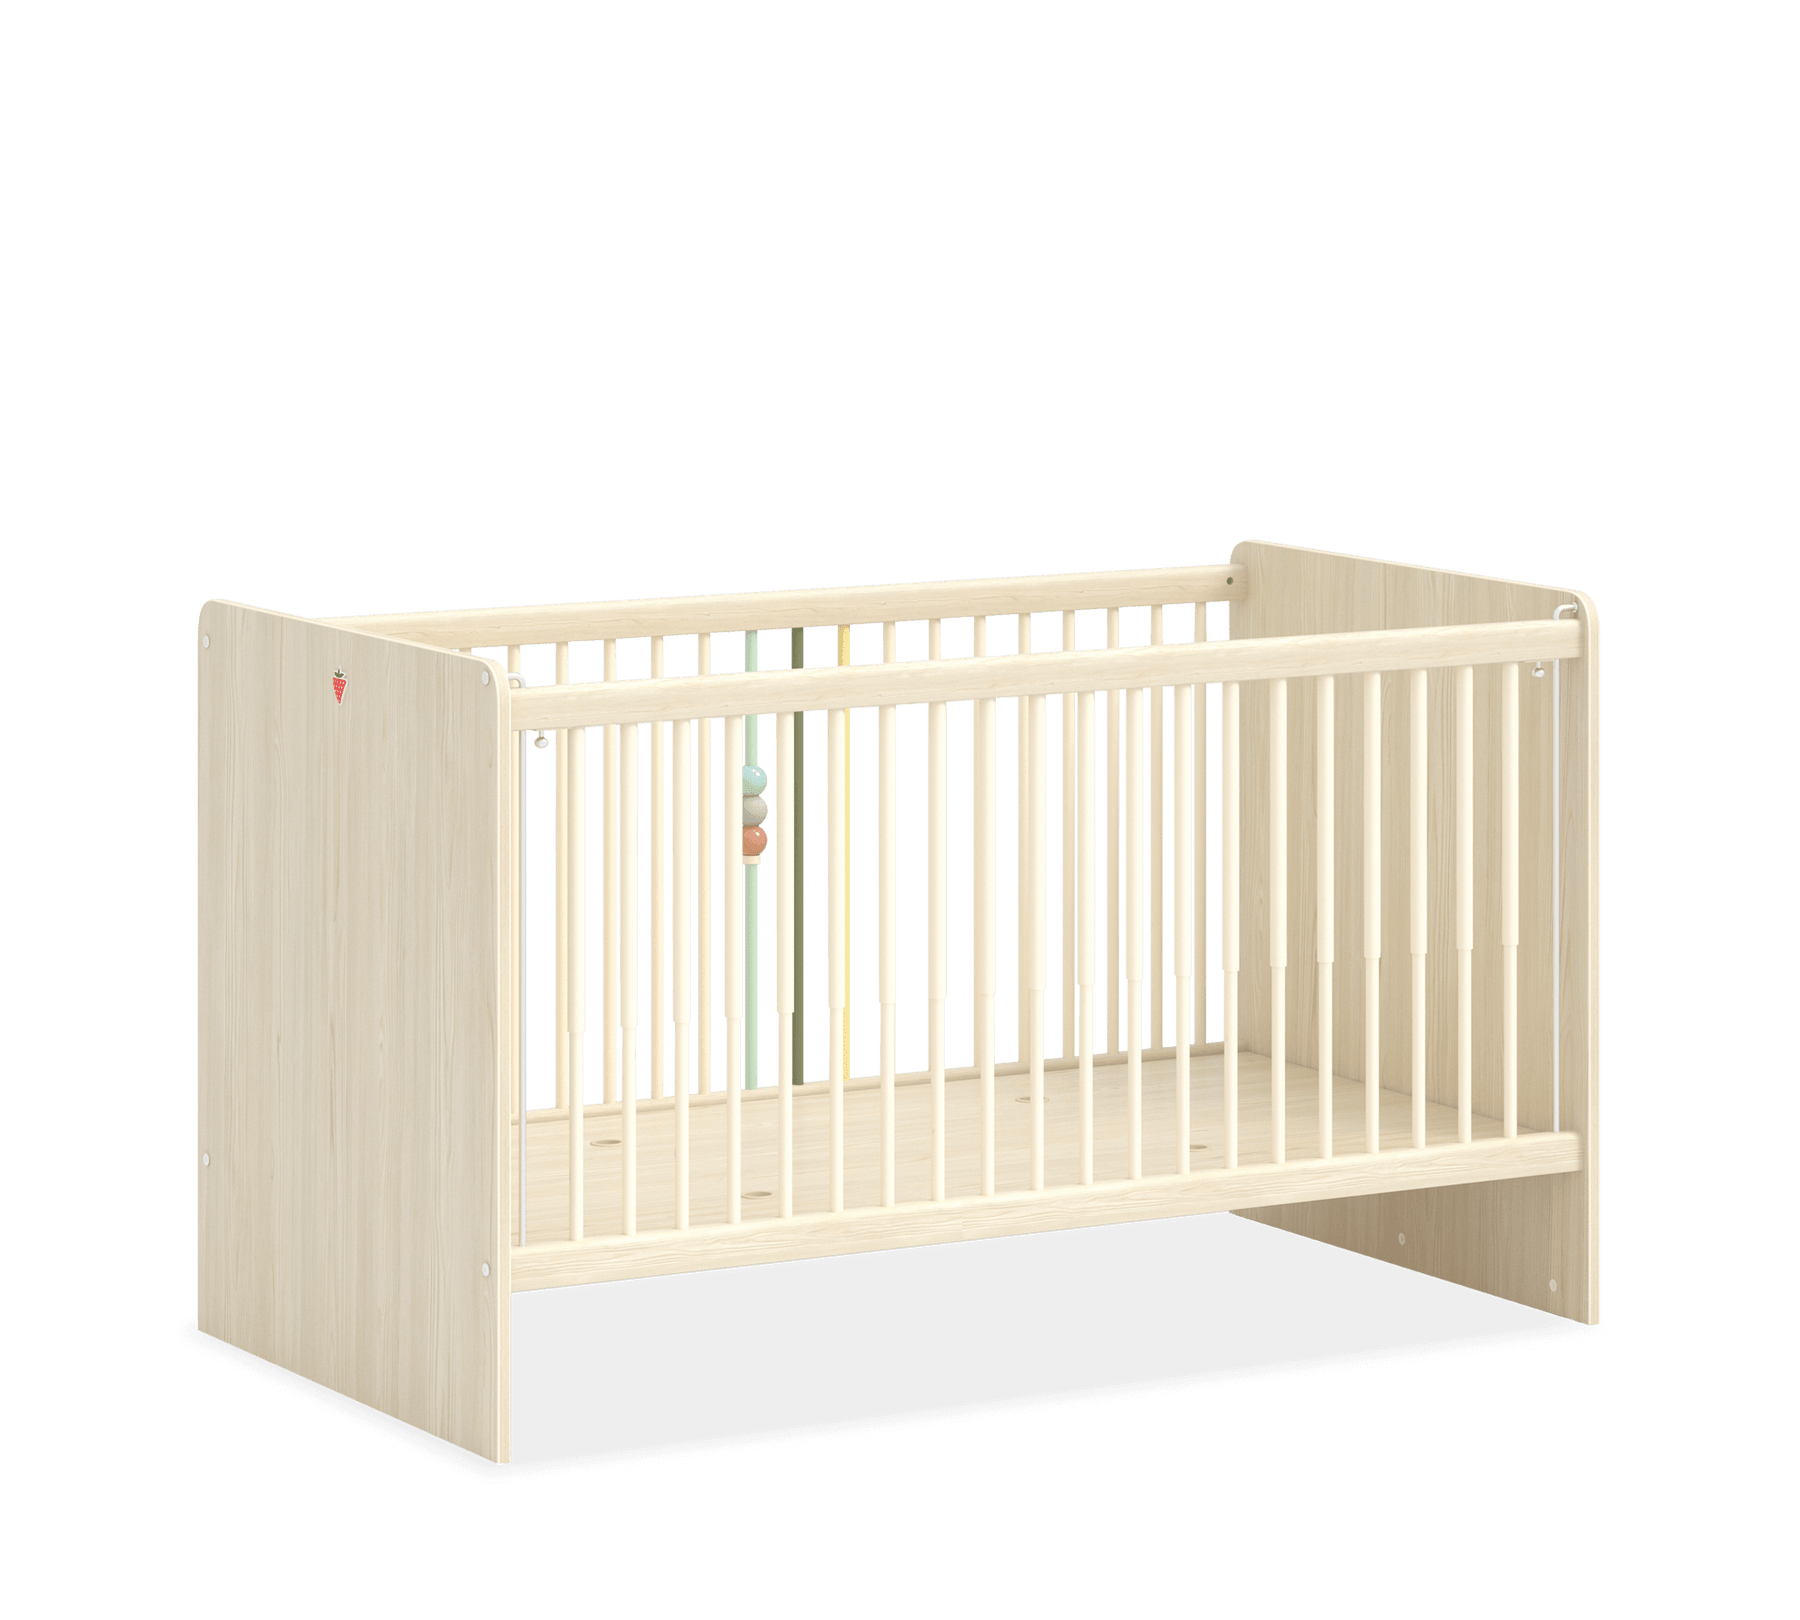 Cilek Montes Natural Lift Baby Bed (70X140 Cm) - Kids Haven